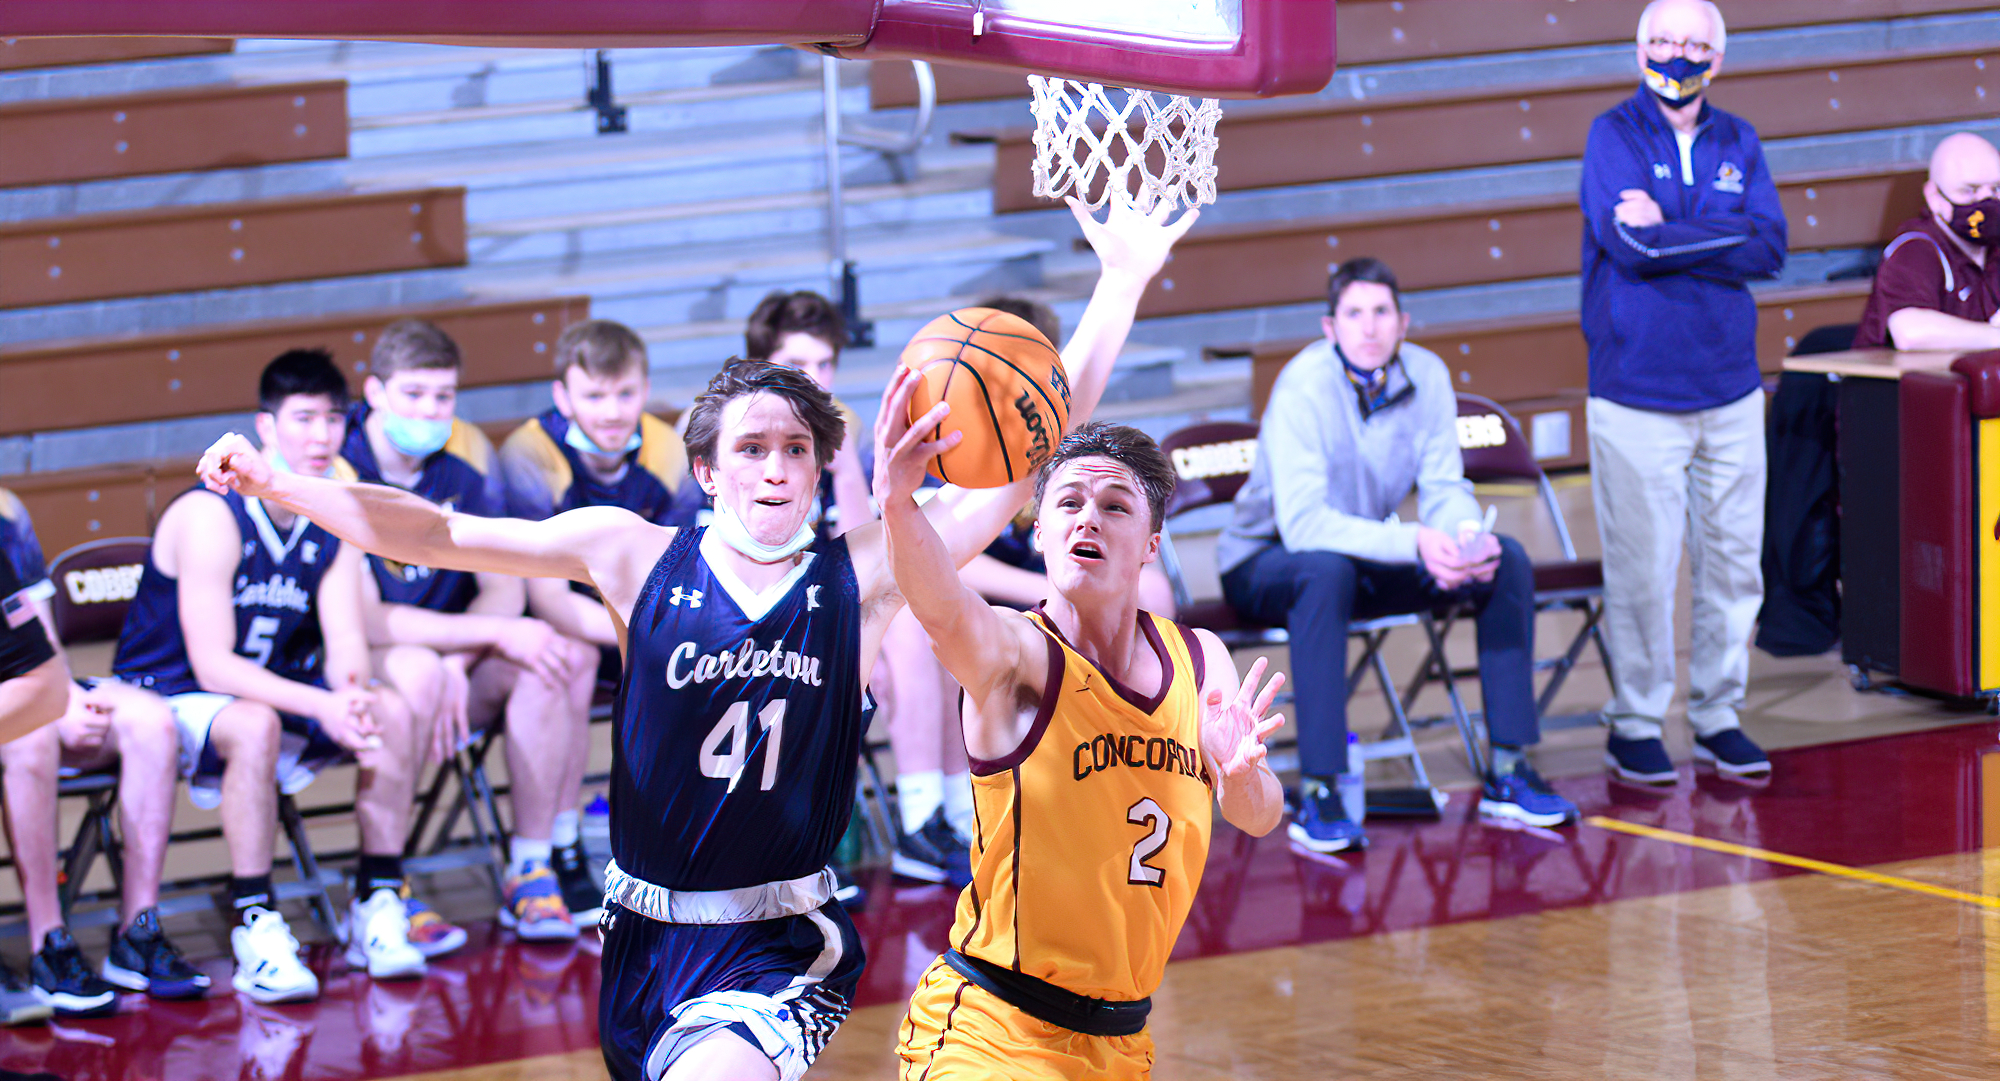 Jackson Jangula scores on the reverse layup during the first half of the Cobbers' game with Carleton. He also went 4-for-5 from 3-point range,